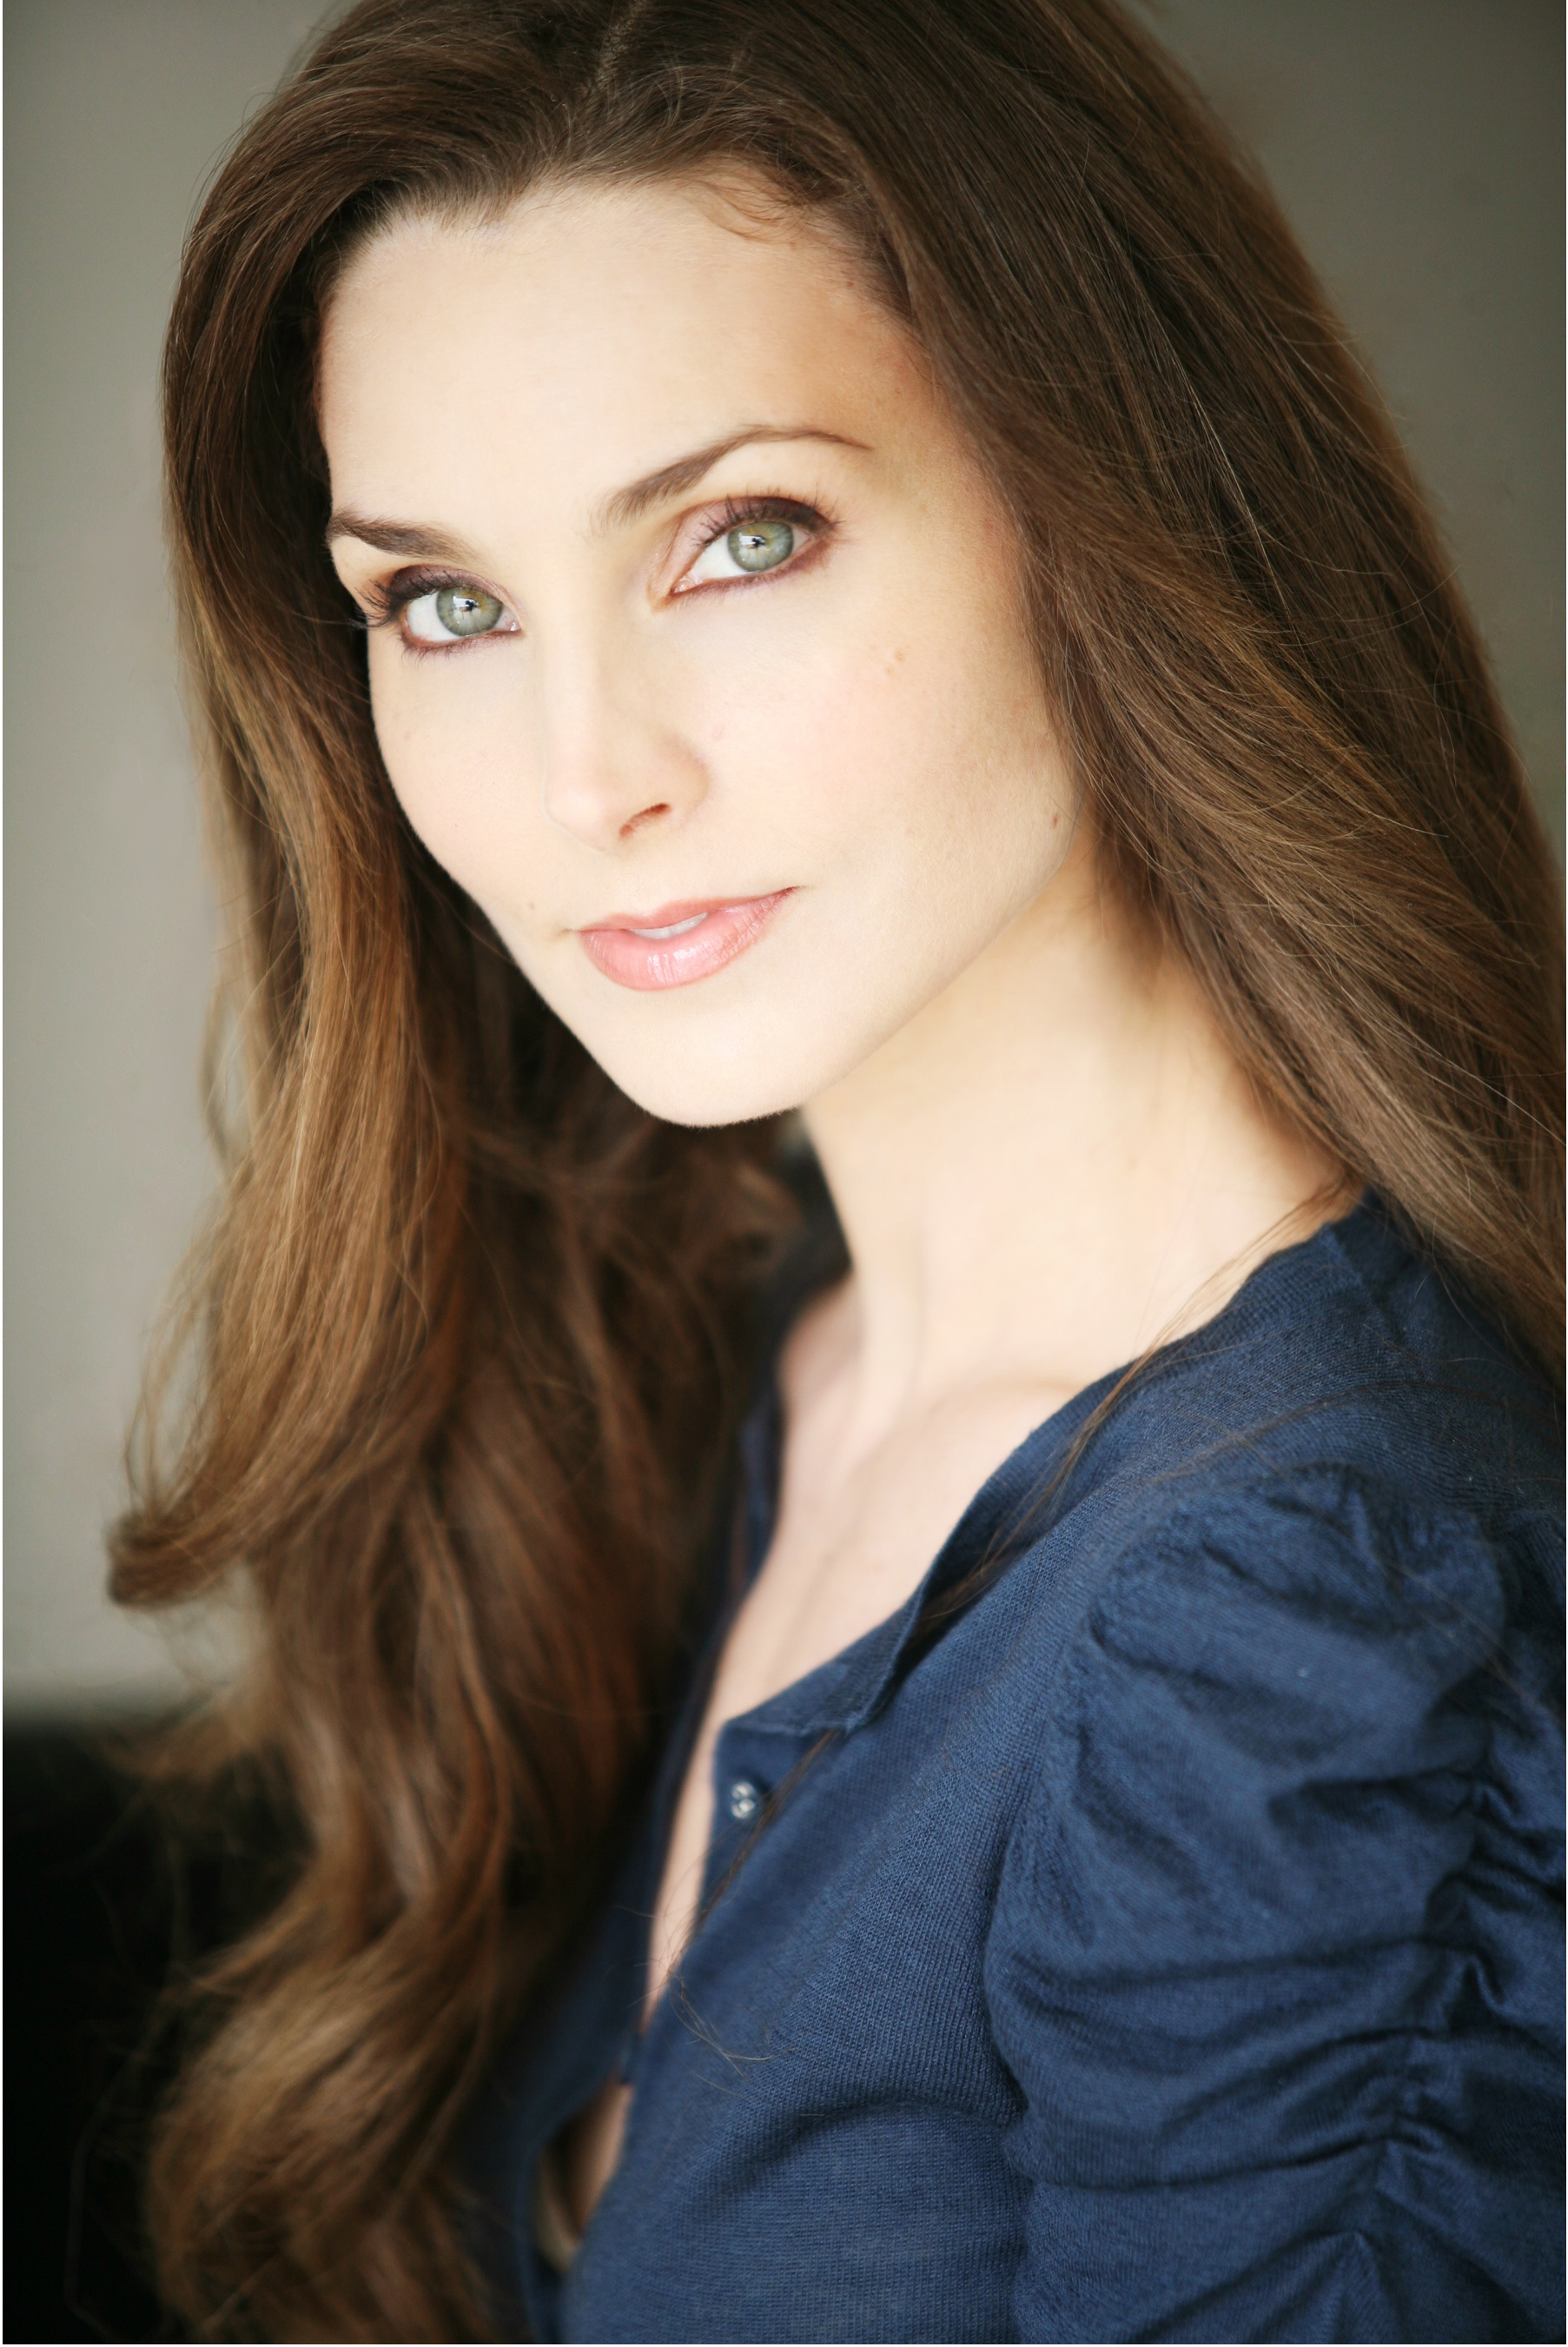 Pictures of Alicia Minshew - Pictures Of Celebrities